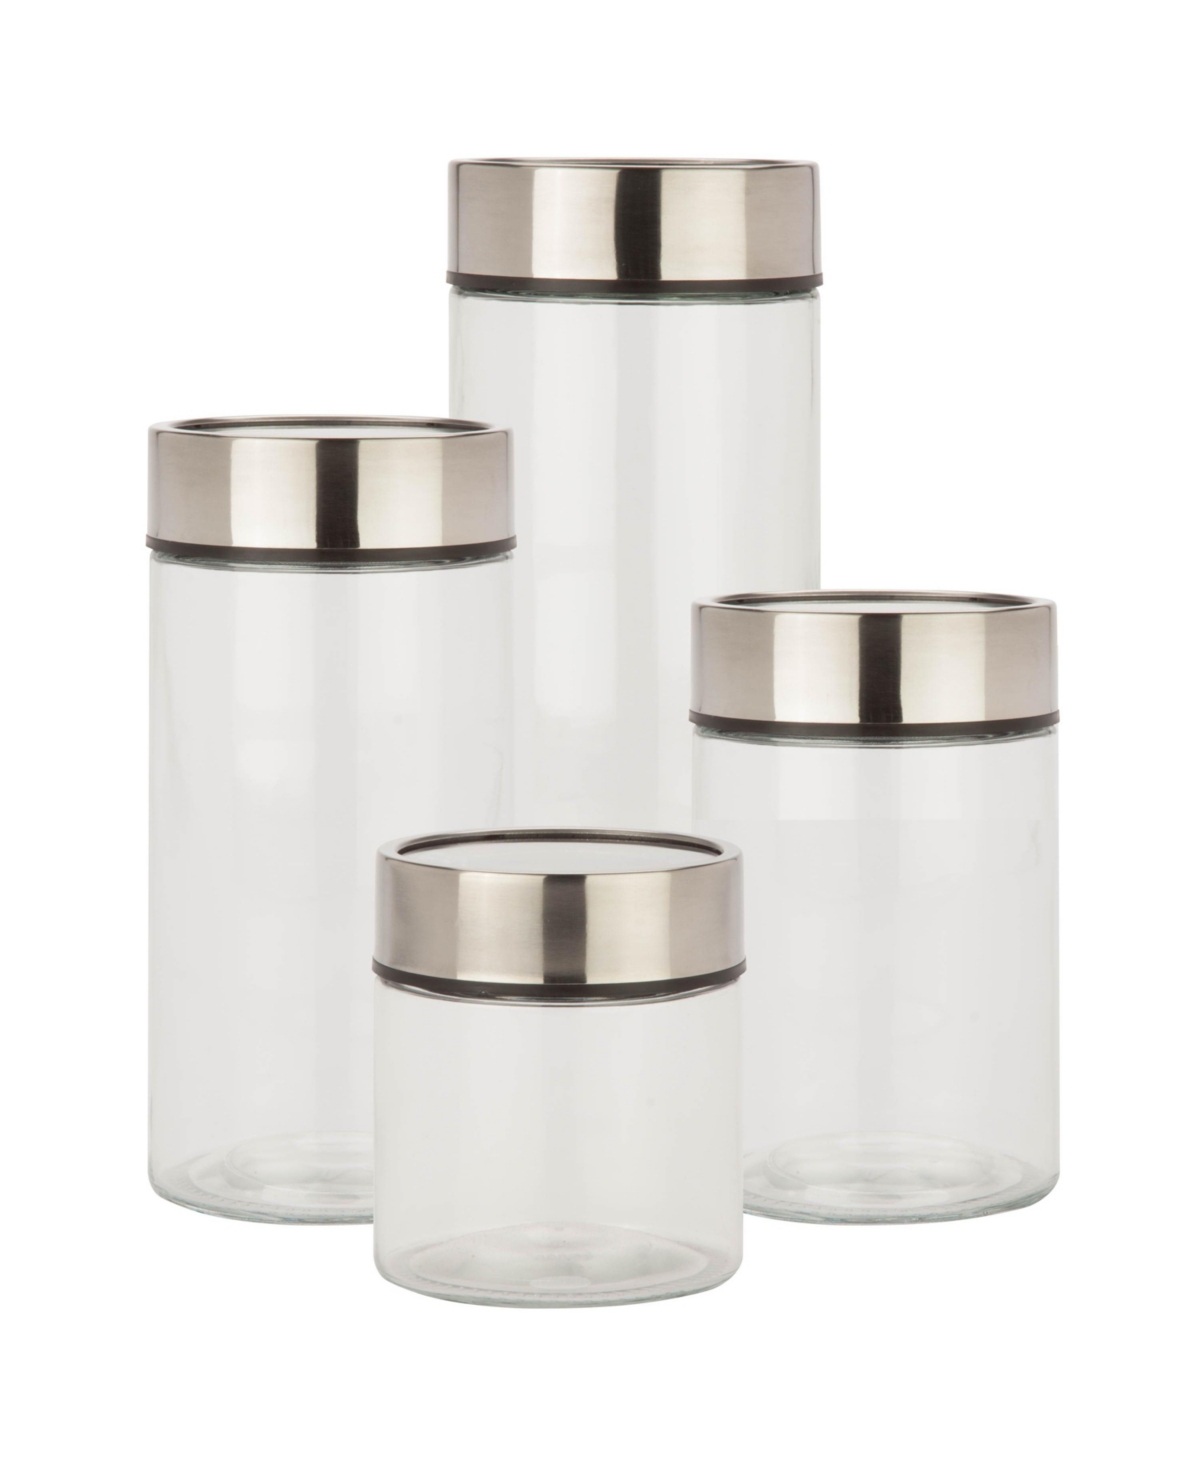 Stainless Steel Lids and Fresh-Date Dials Kitchen Glass Jar Set, Set of 4 - Chrome